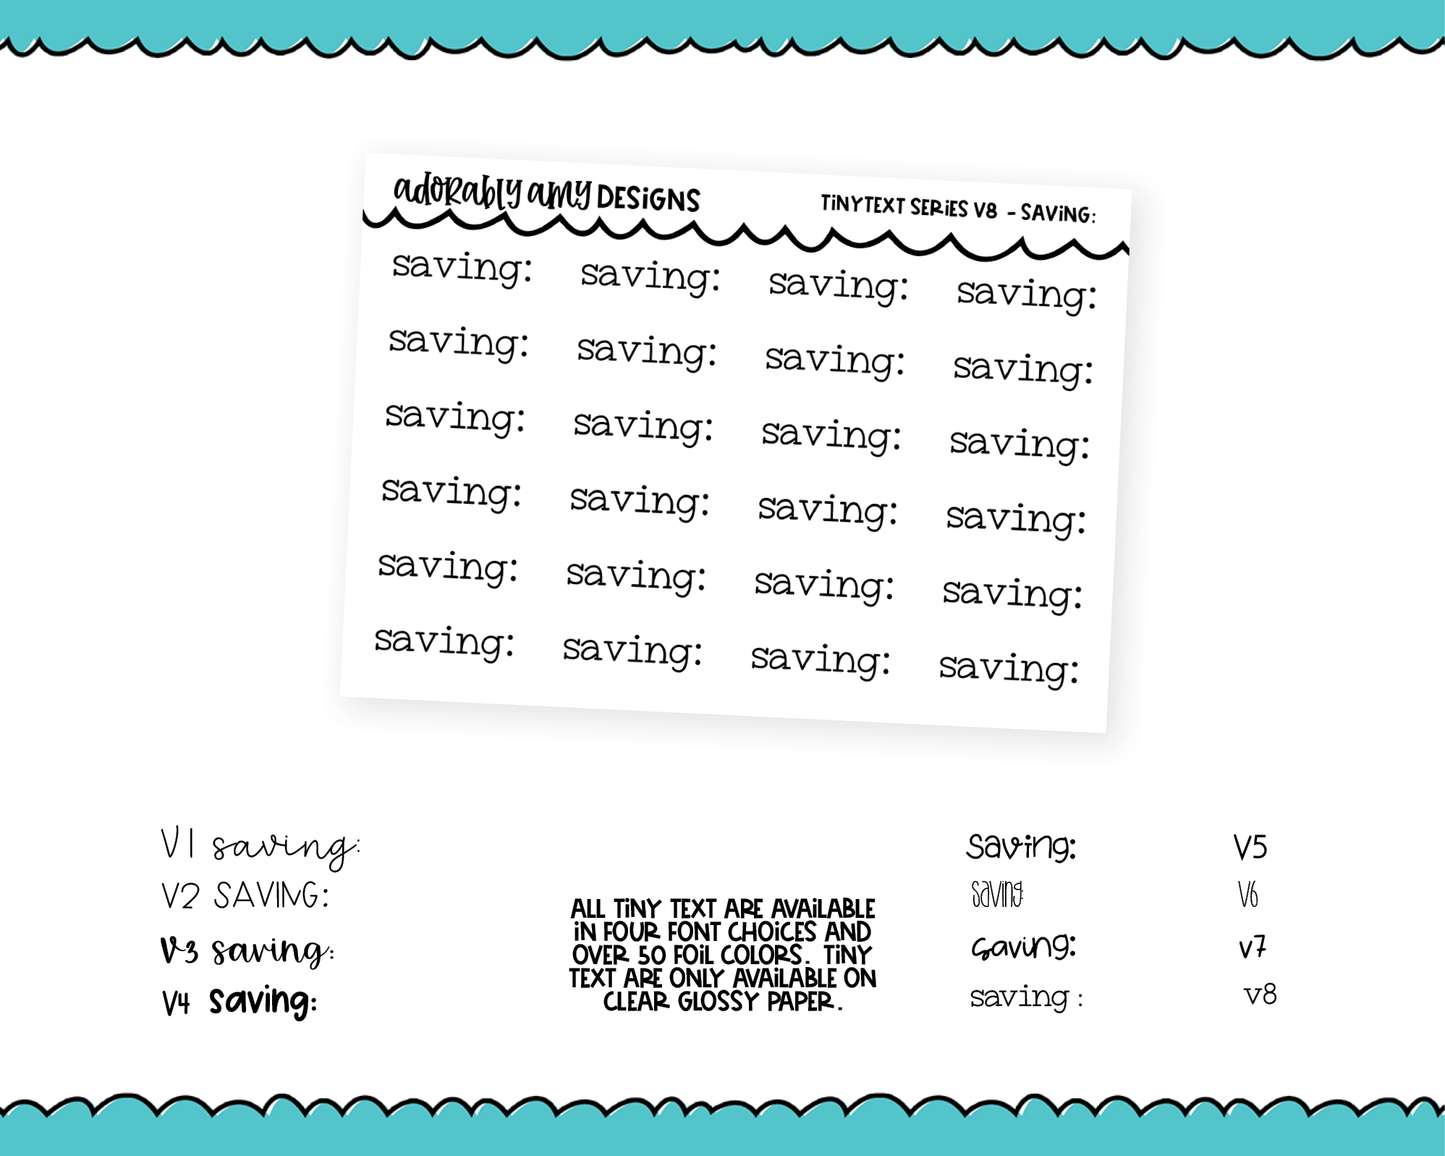 Foiled Tiny Text Series - Saving Checklist Size Planner Stickers for any Planner or Insert